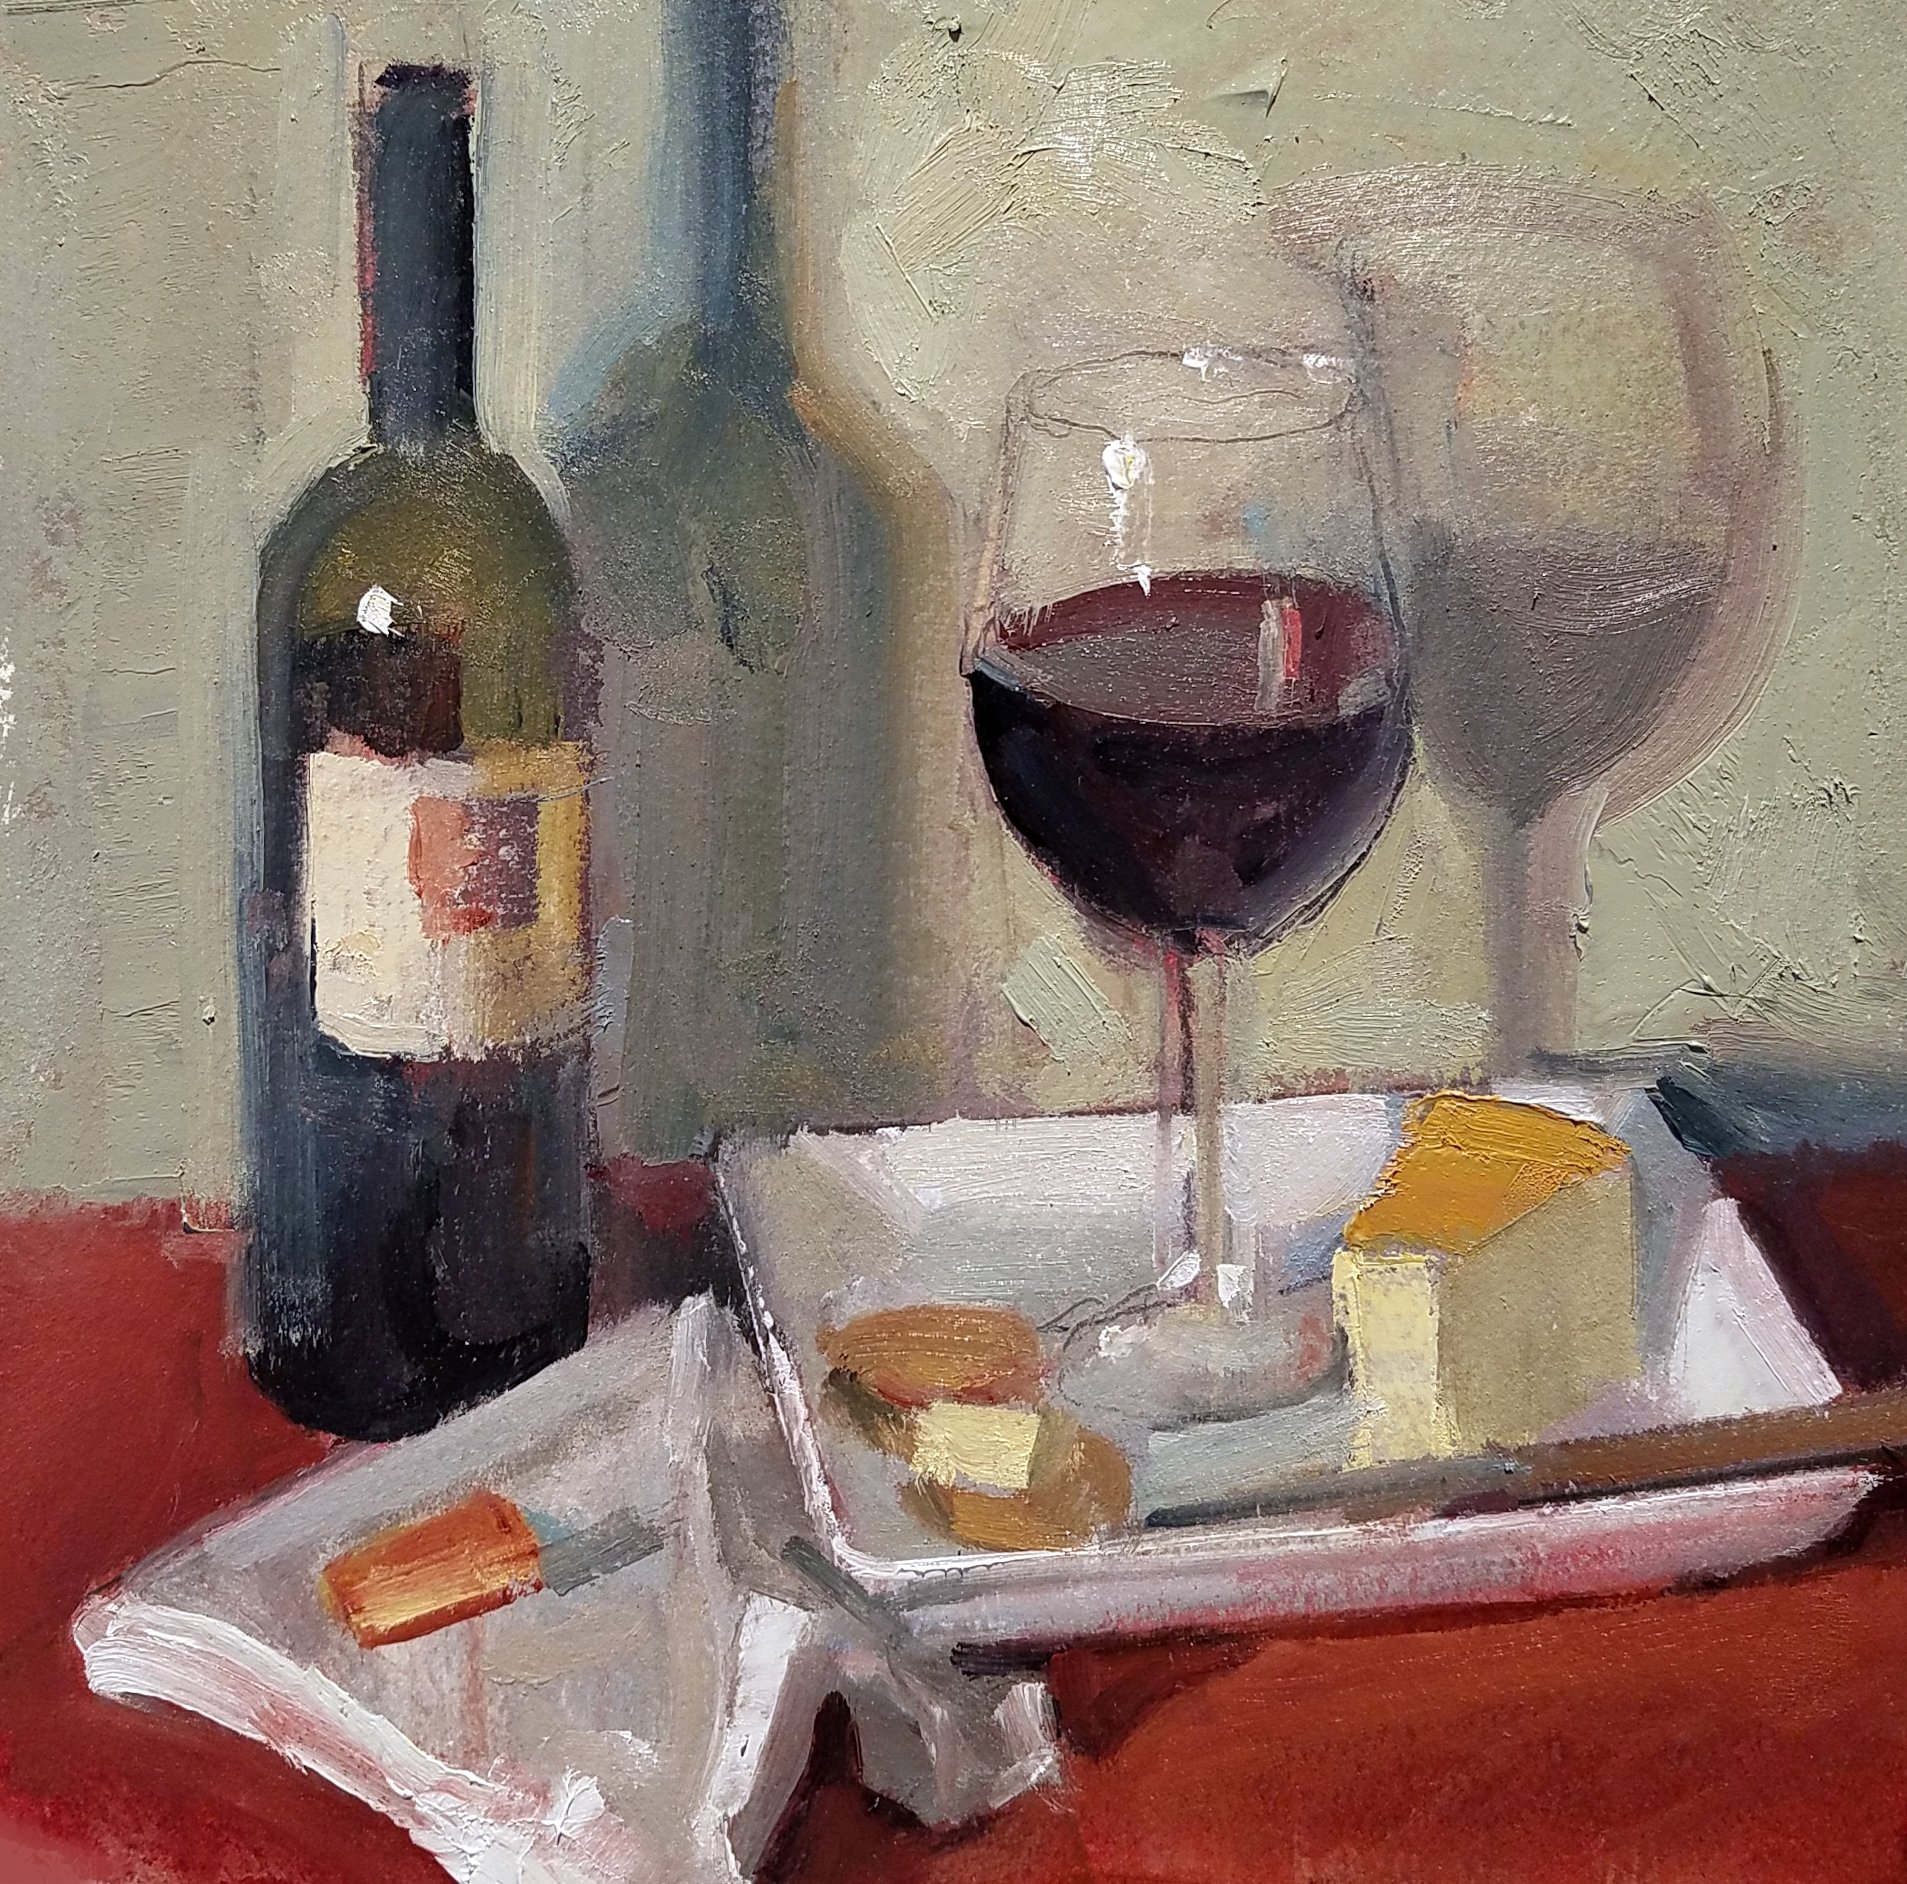 wine and cheese